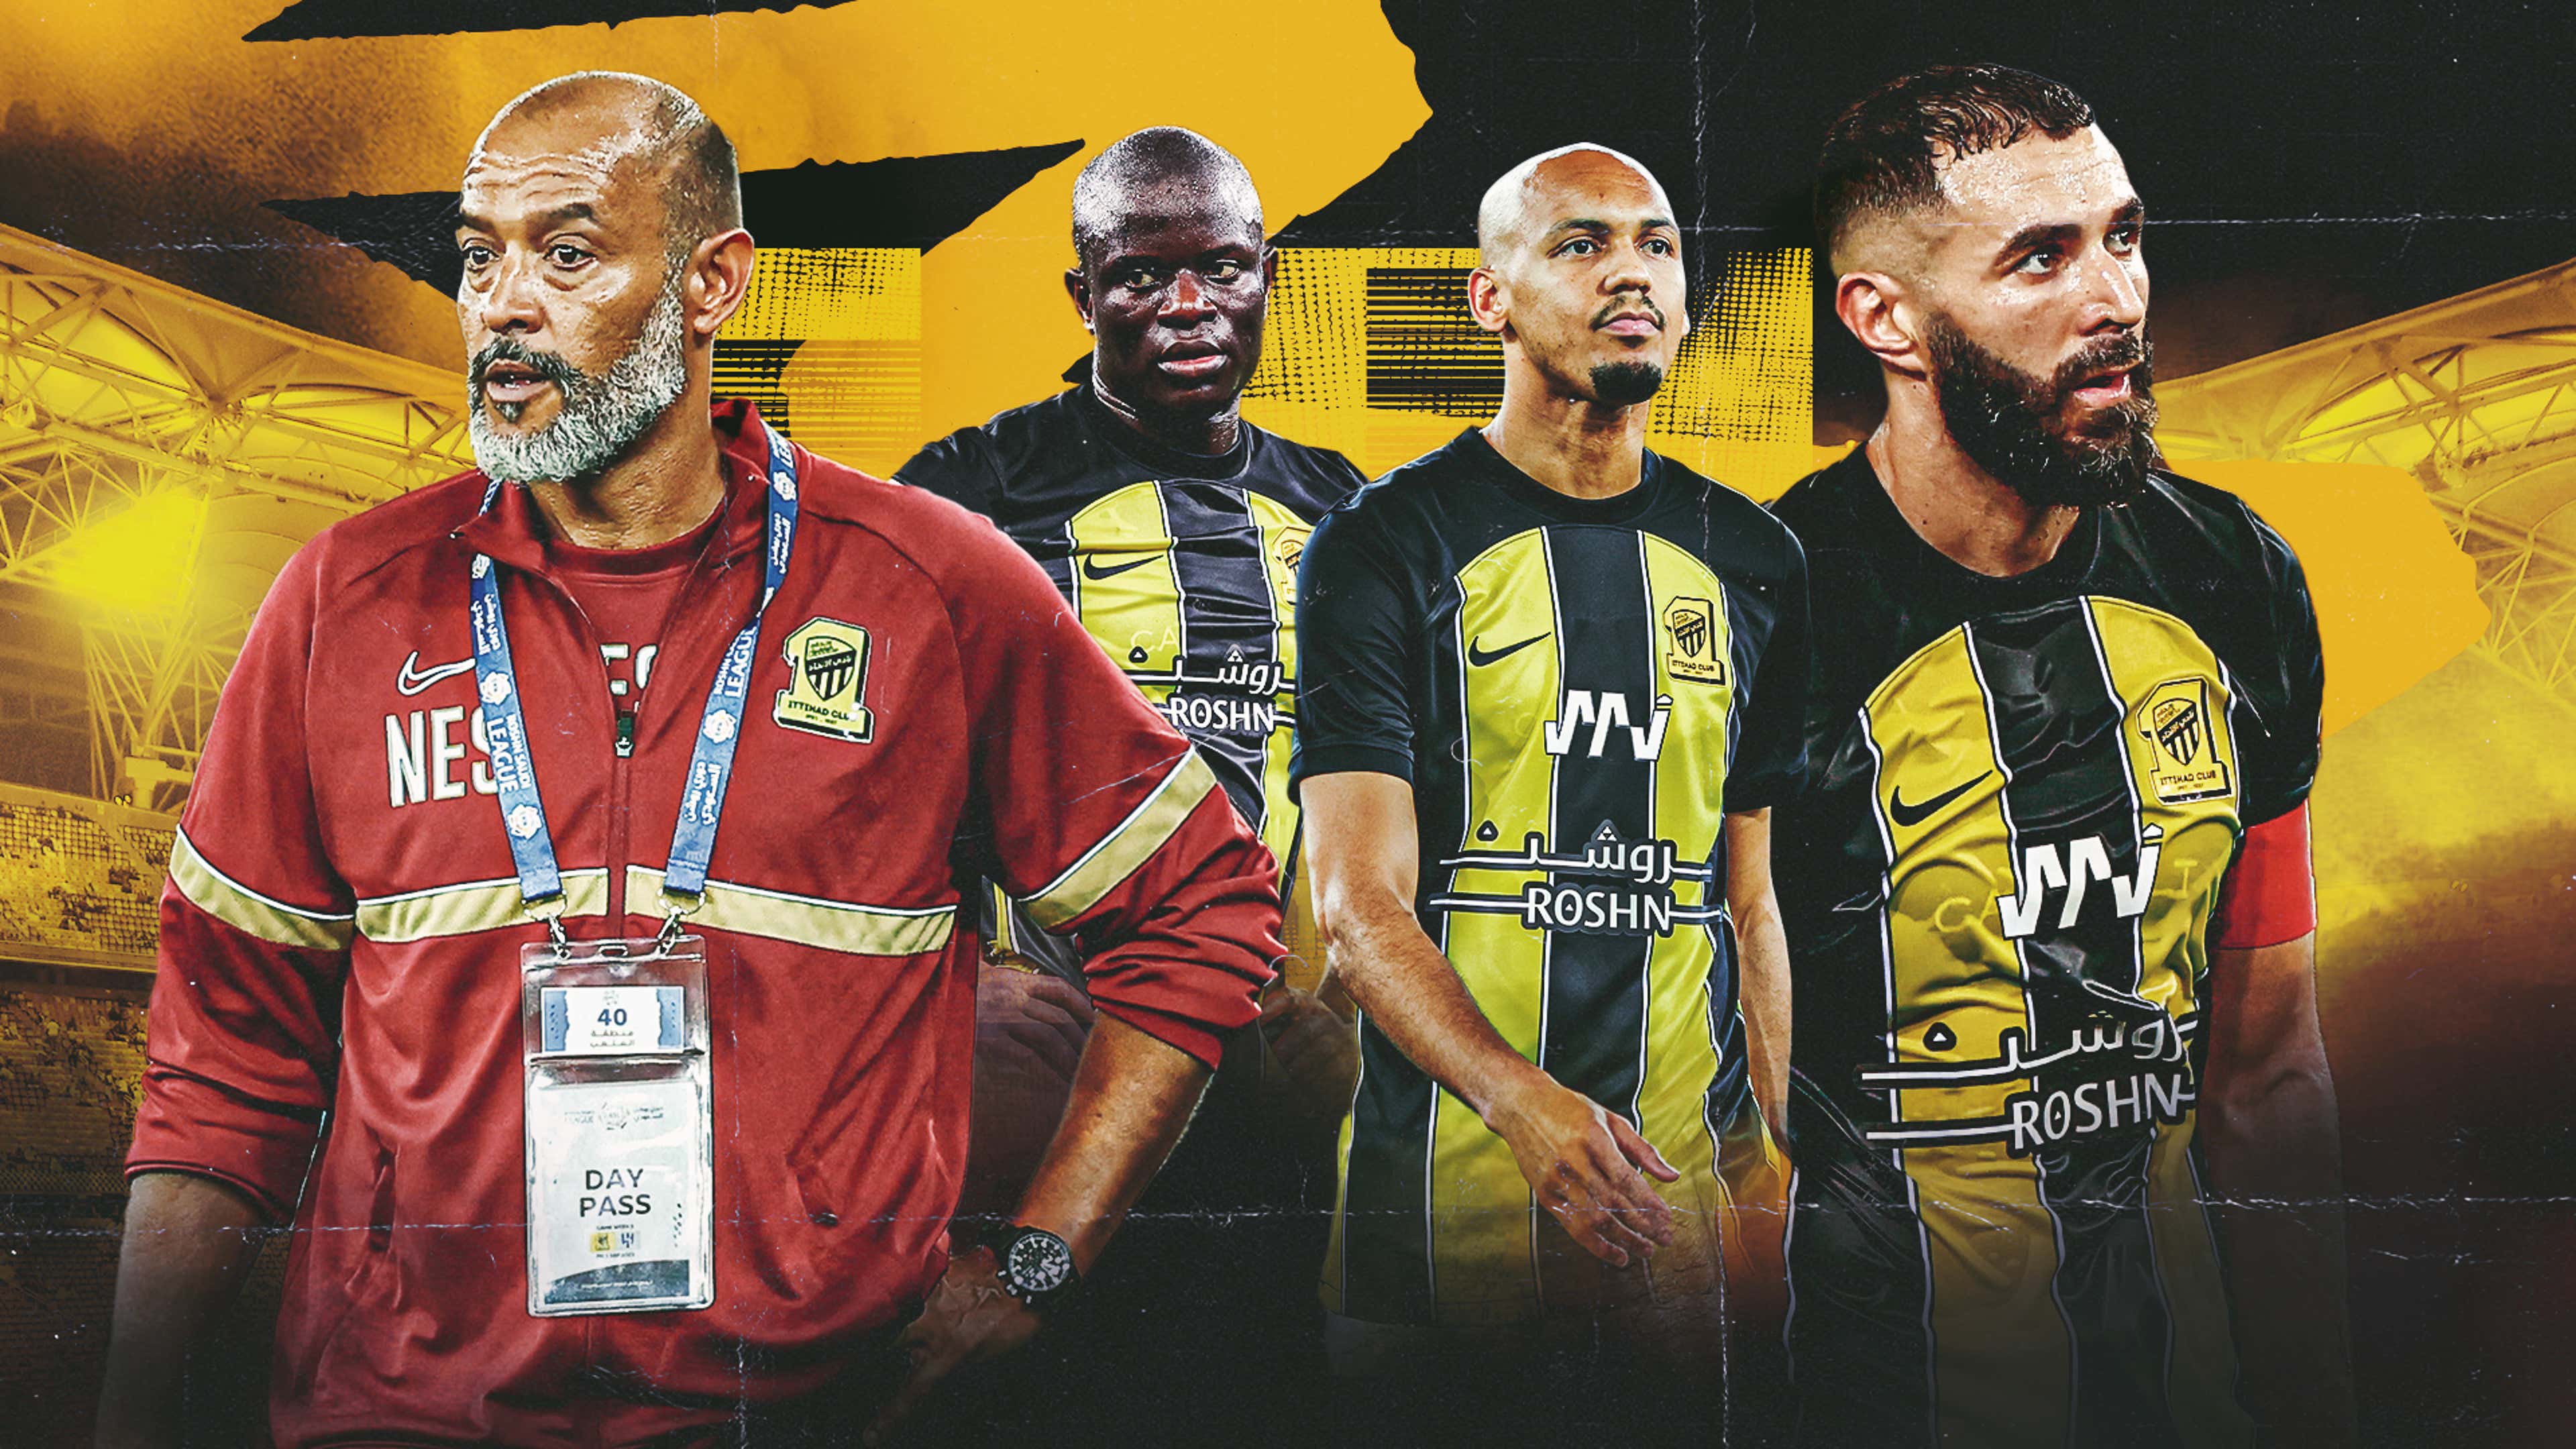 What is the reason for canceling the match between Al-Ittihad and